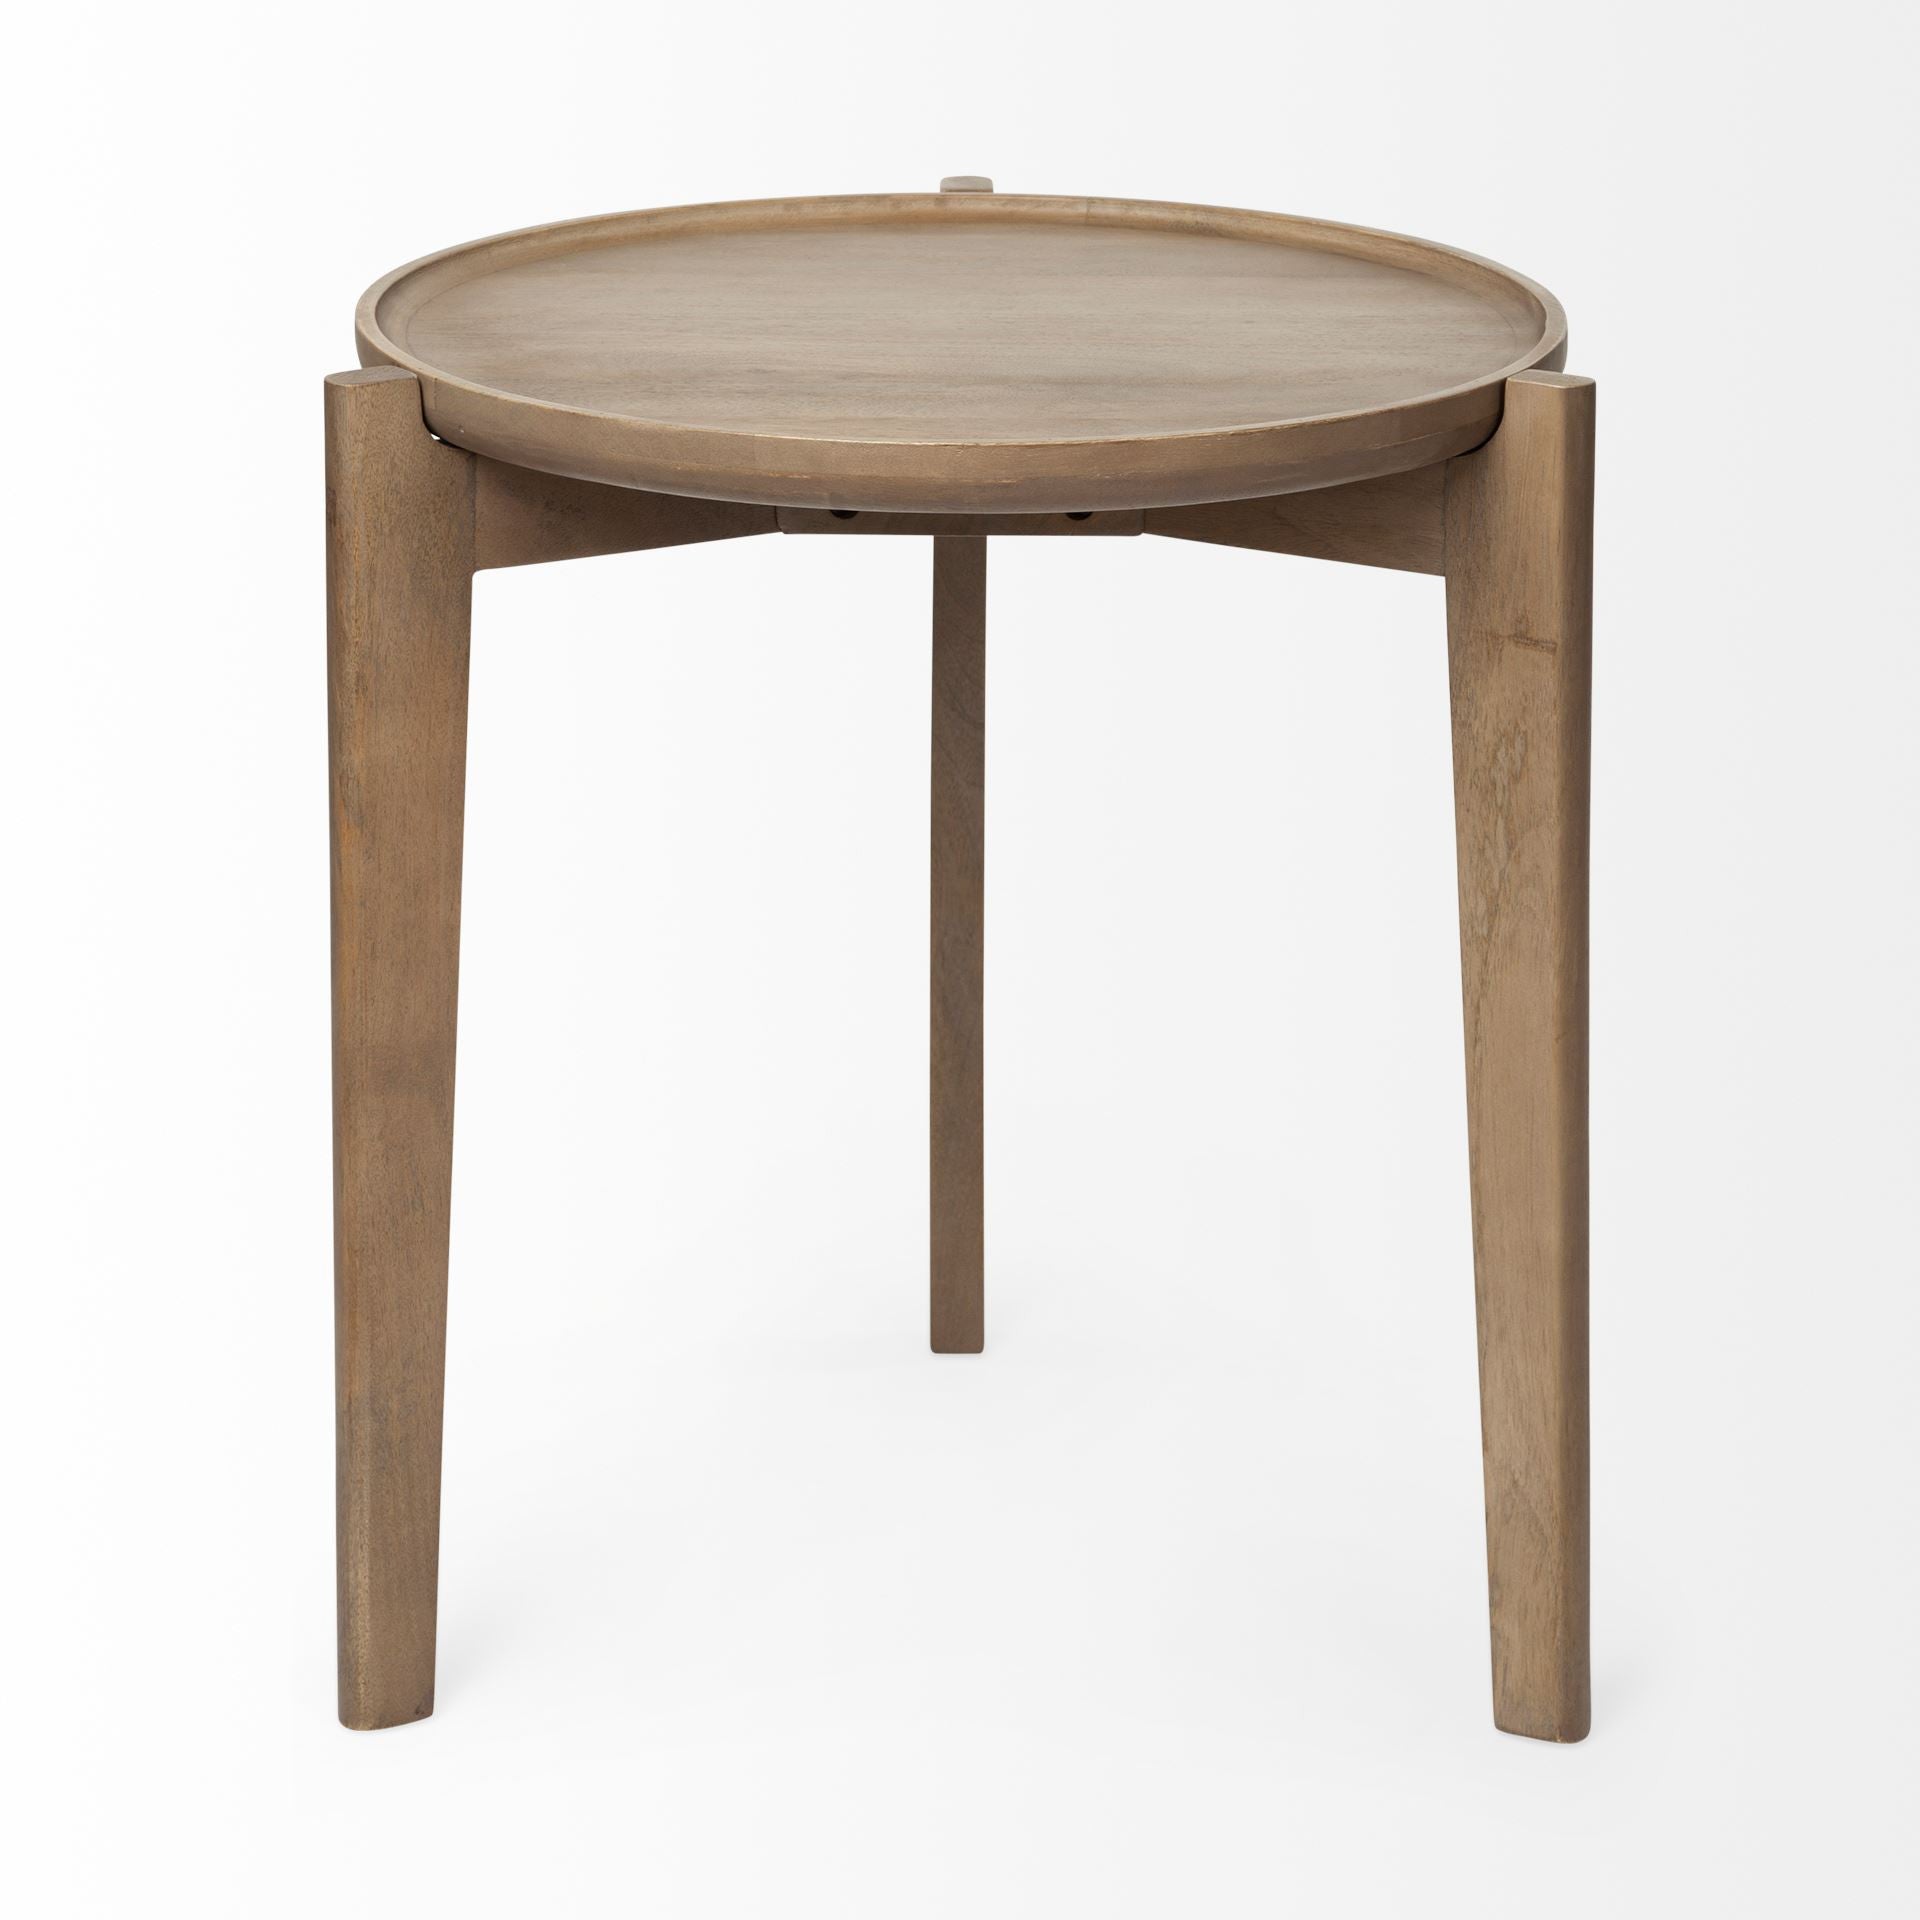 Brown Wood Round Top Accent Table With Three-Legged Base